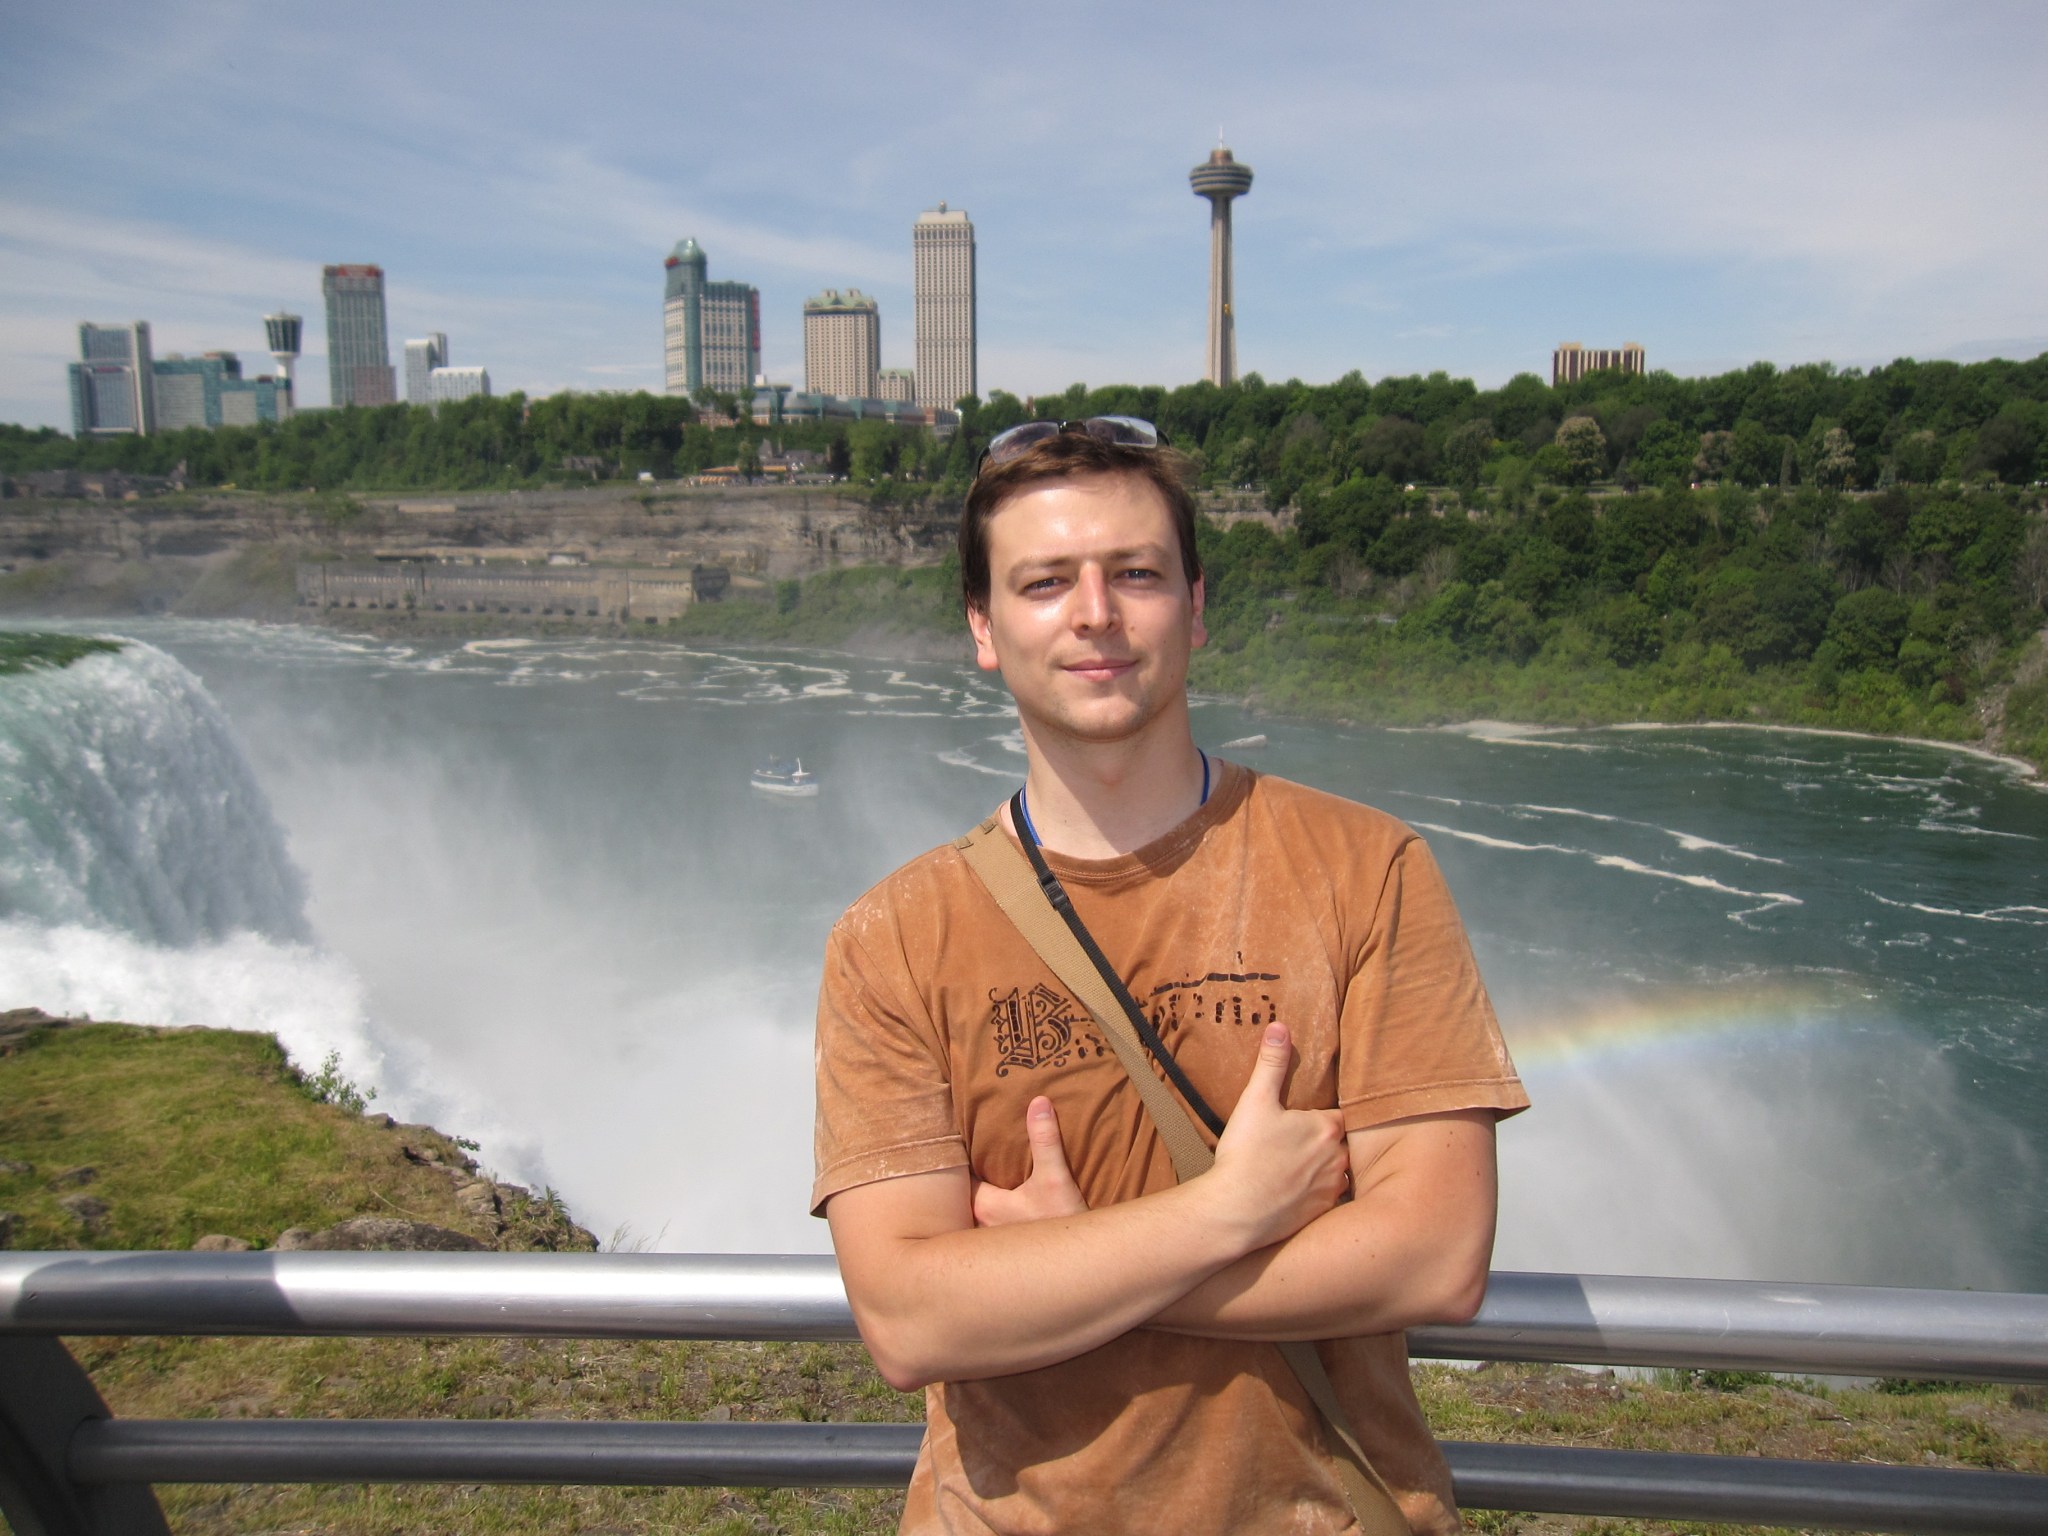 Man with light skin and brown hair wearing a orange t shirt stands in front of a waterfall with skyscrapers along the horizon